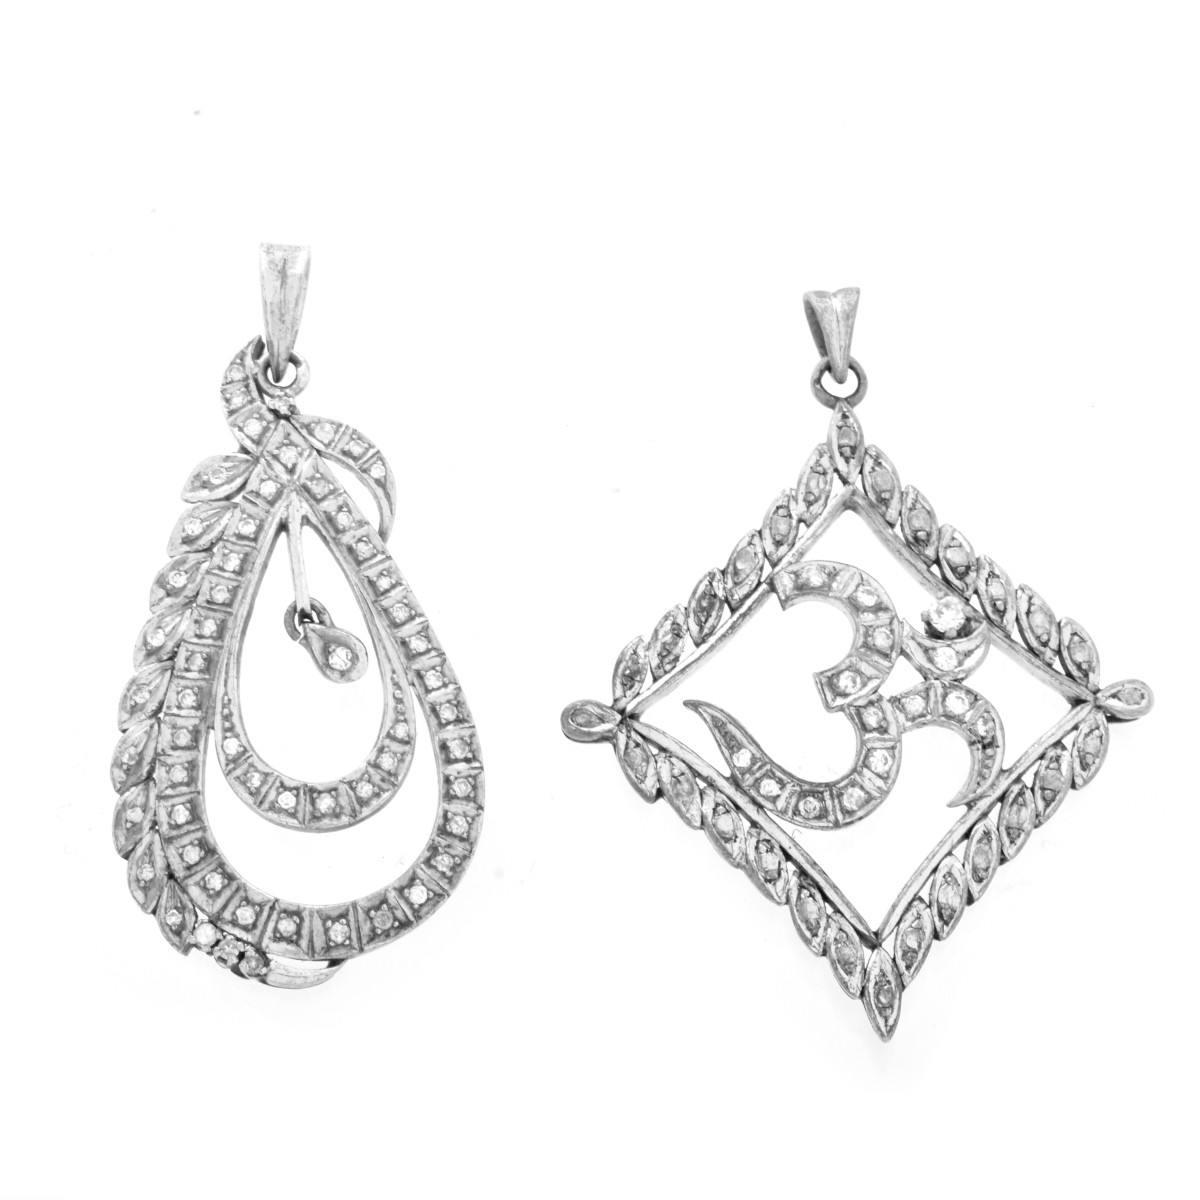 Indian Diamond and Silver Jewelry